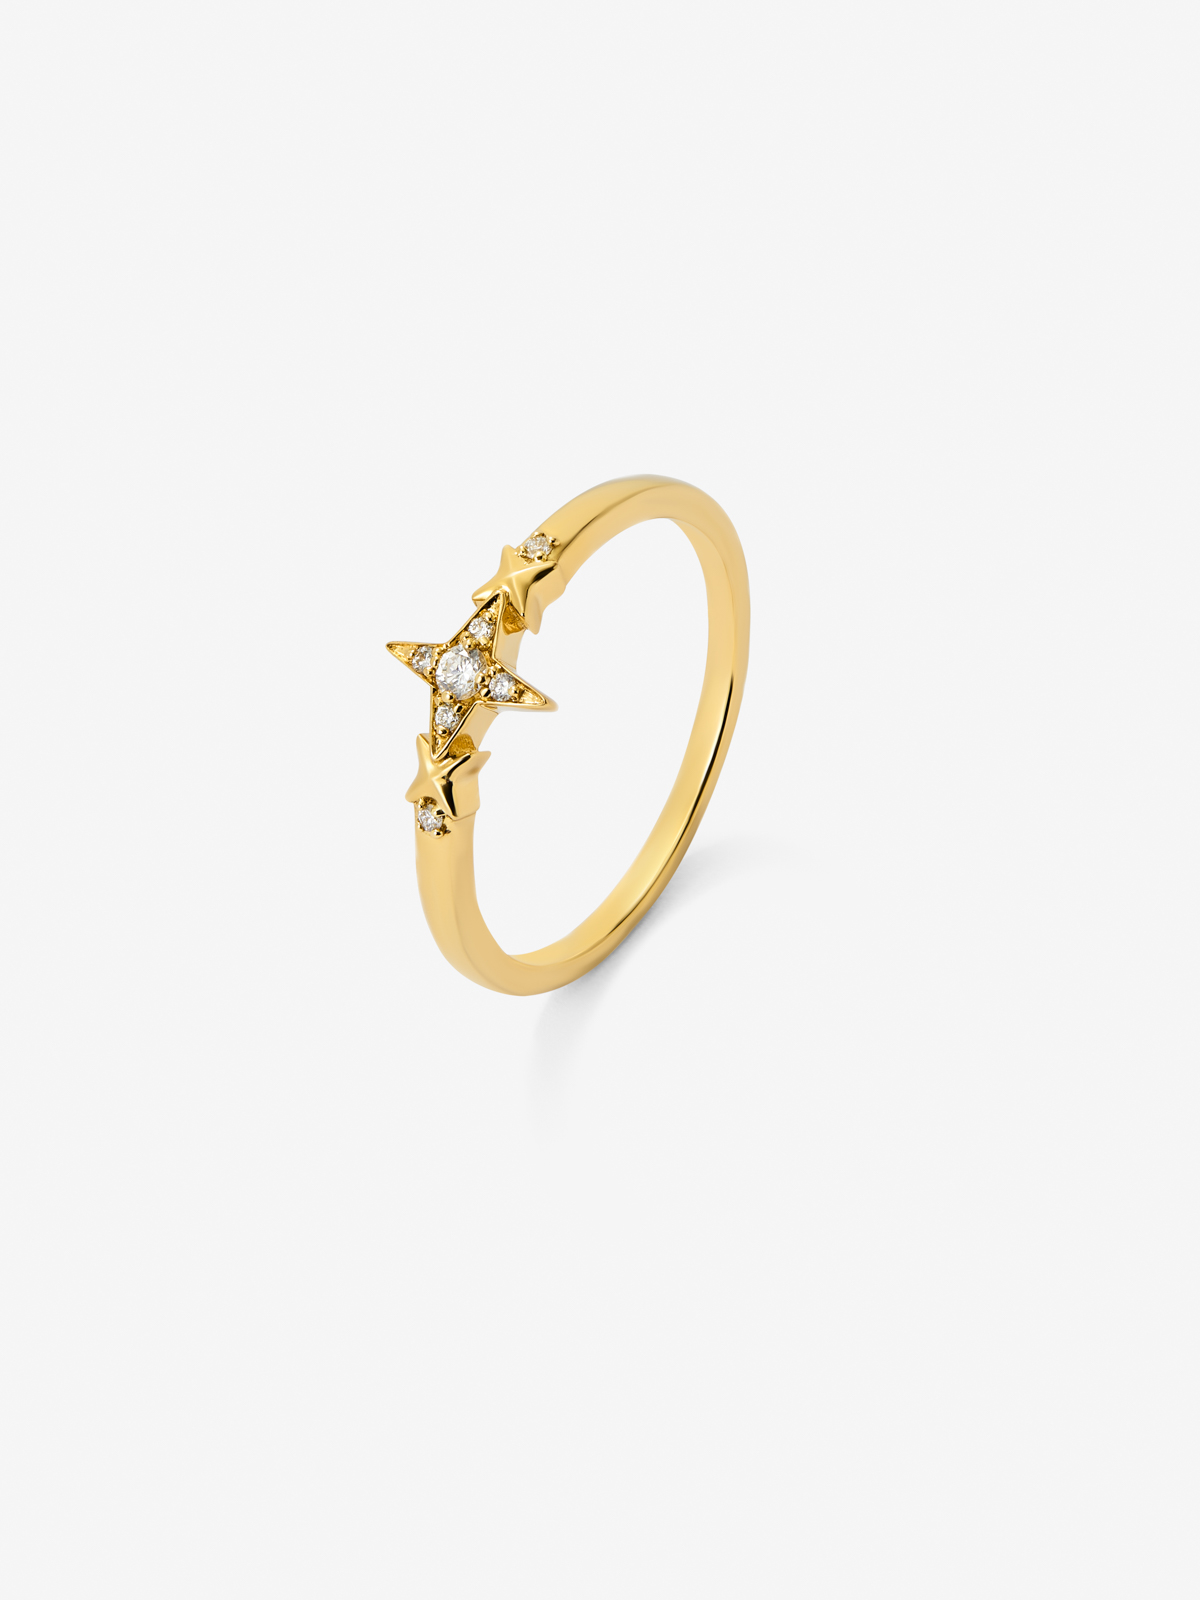 18K yellow gold ring with 7 brilliant-cut diamonds with a total of 0.05 cts